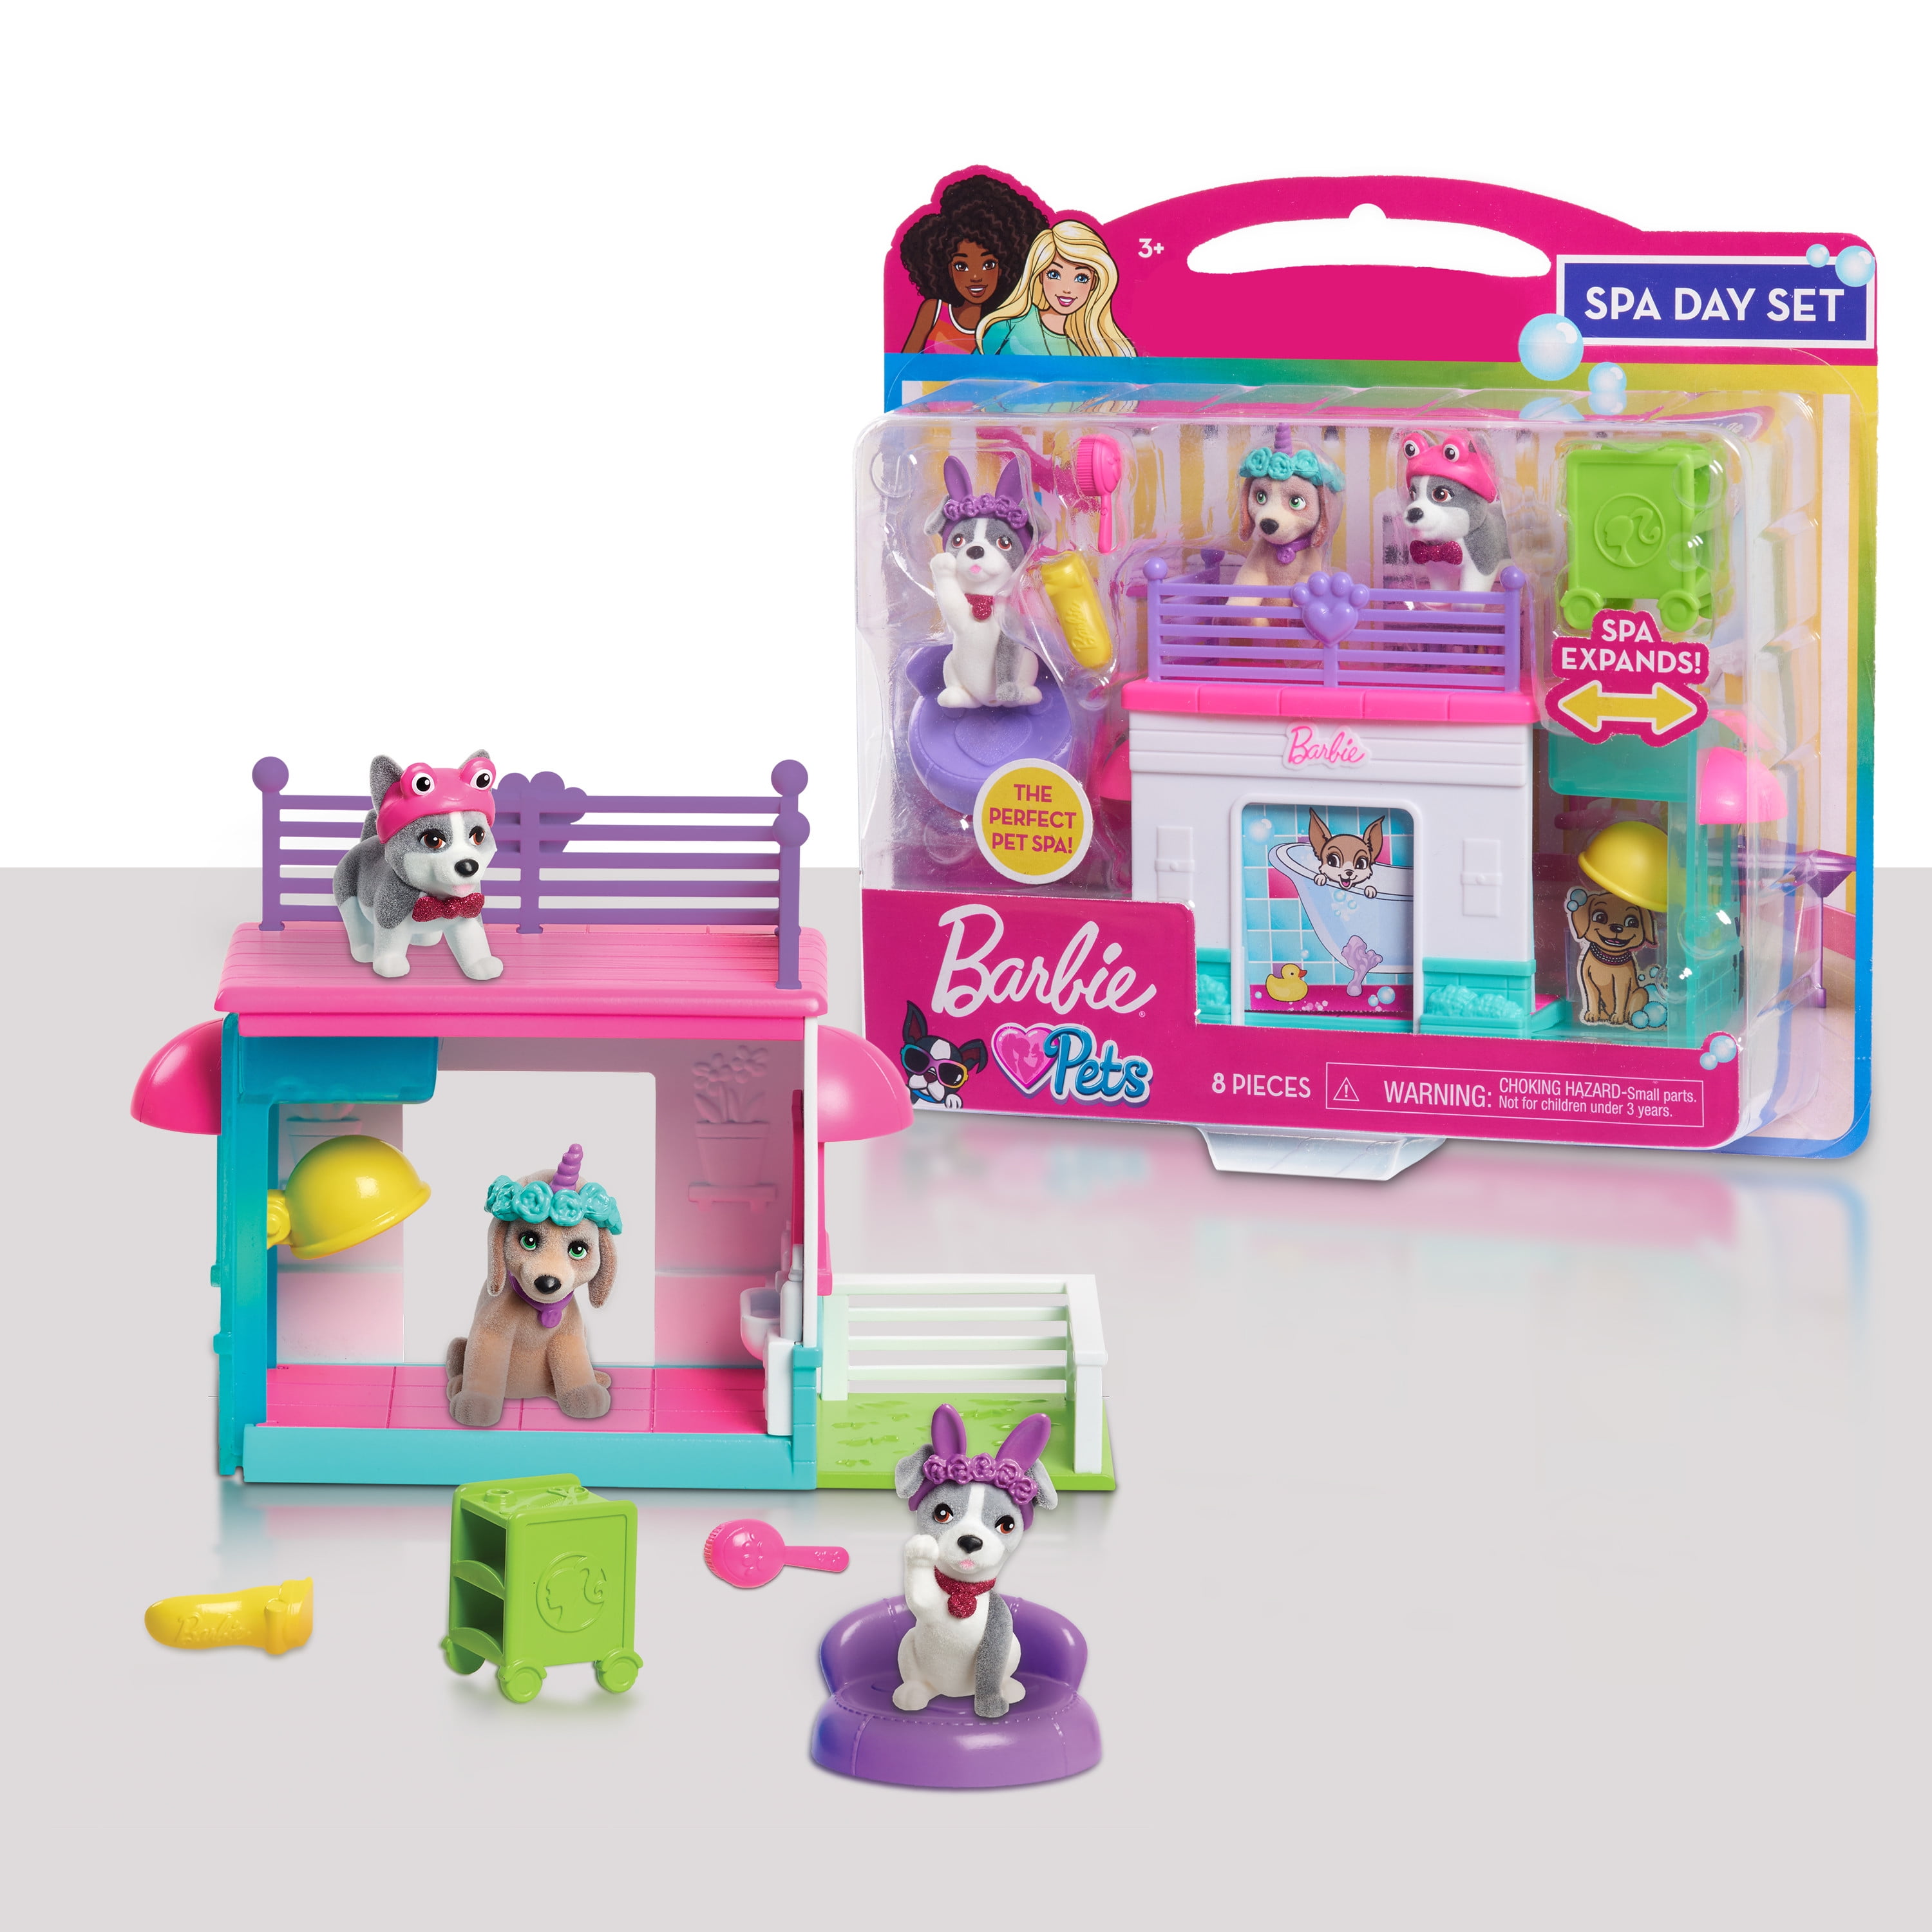 Ontwikkelen Dapperheid voor Barbie Pets Spa Day Playset, 8 Piece Connectible Playset with Pet Figures  and Accessories, Kids Toys for Ages 3 Up, Gifts and Presents - Walmart.com